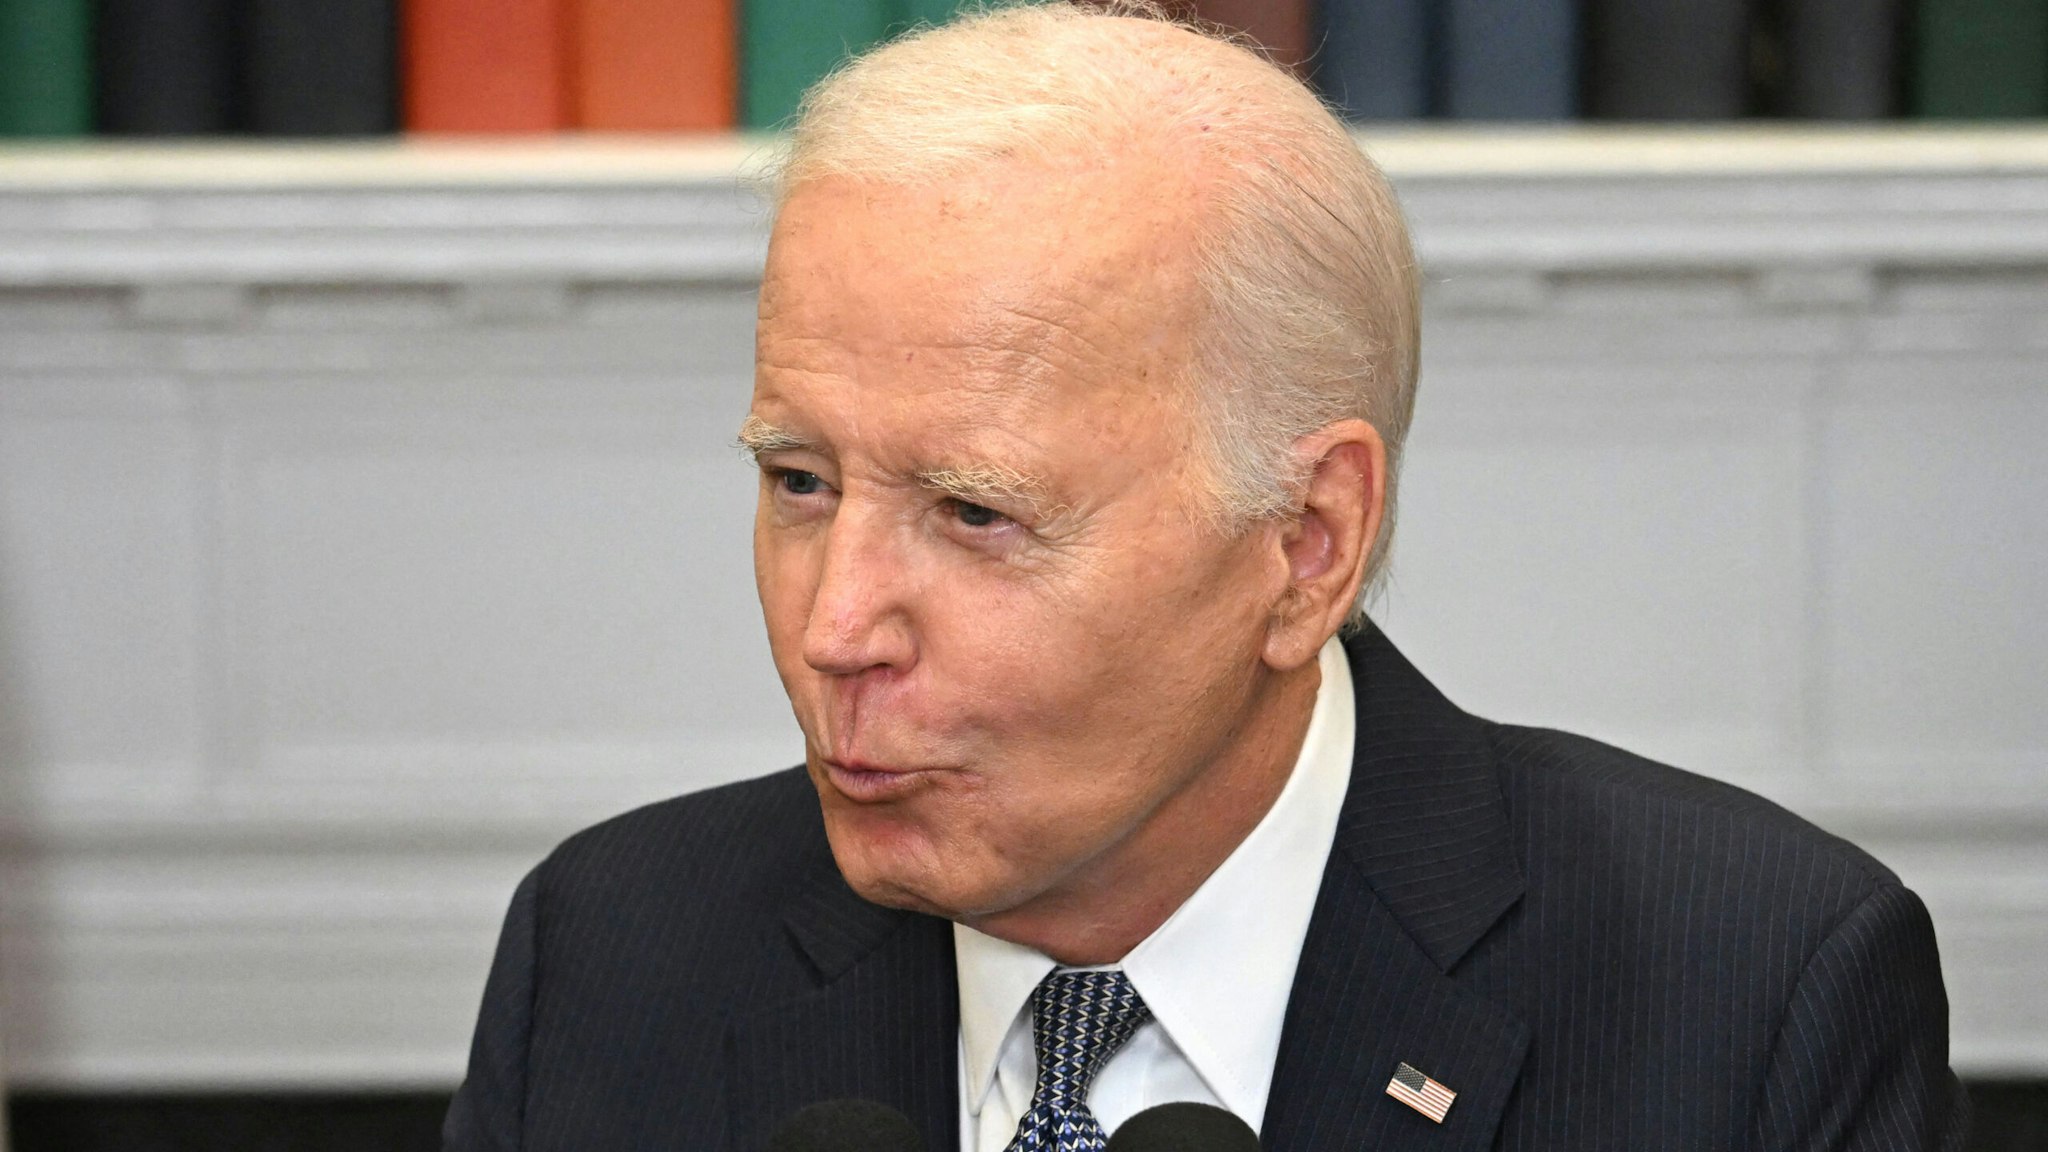 US President Joe Biden speaks about the US Supreme Court's decision overruling student debt forgiveness in the Roosevelt Room of the White House in Washington, DC, on June 30, 2023. The court said Biden had overstepped his powers in cancelling more than $400 billion in debt, in an effort to alleviate the financial burden of education that hangs over many Americans decades after they finished their studies.